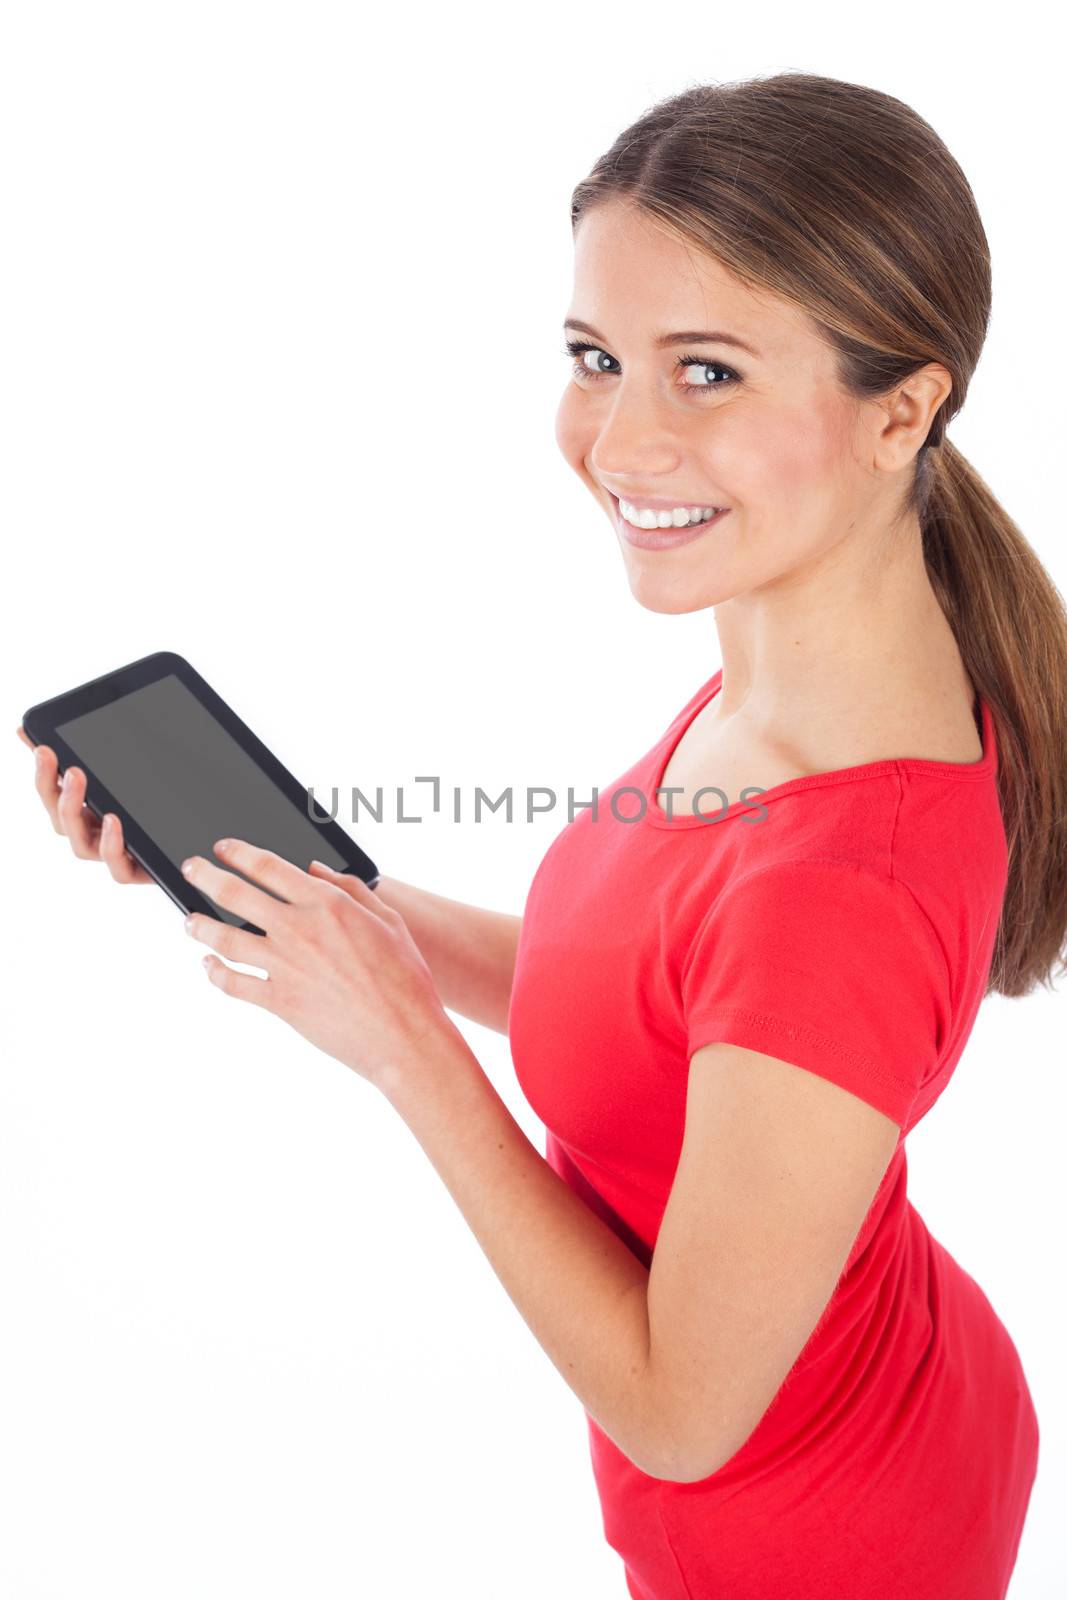 Smiling girl with a blank tablet pc, communication concept